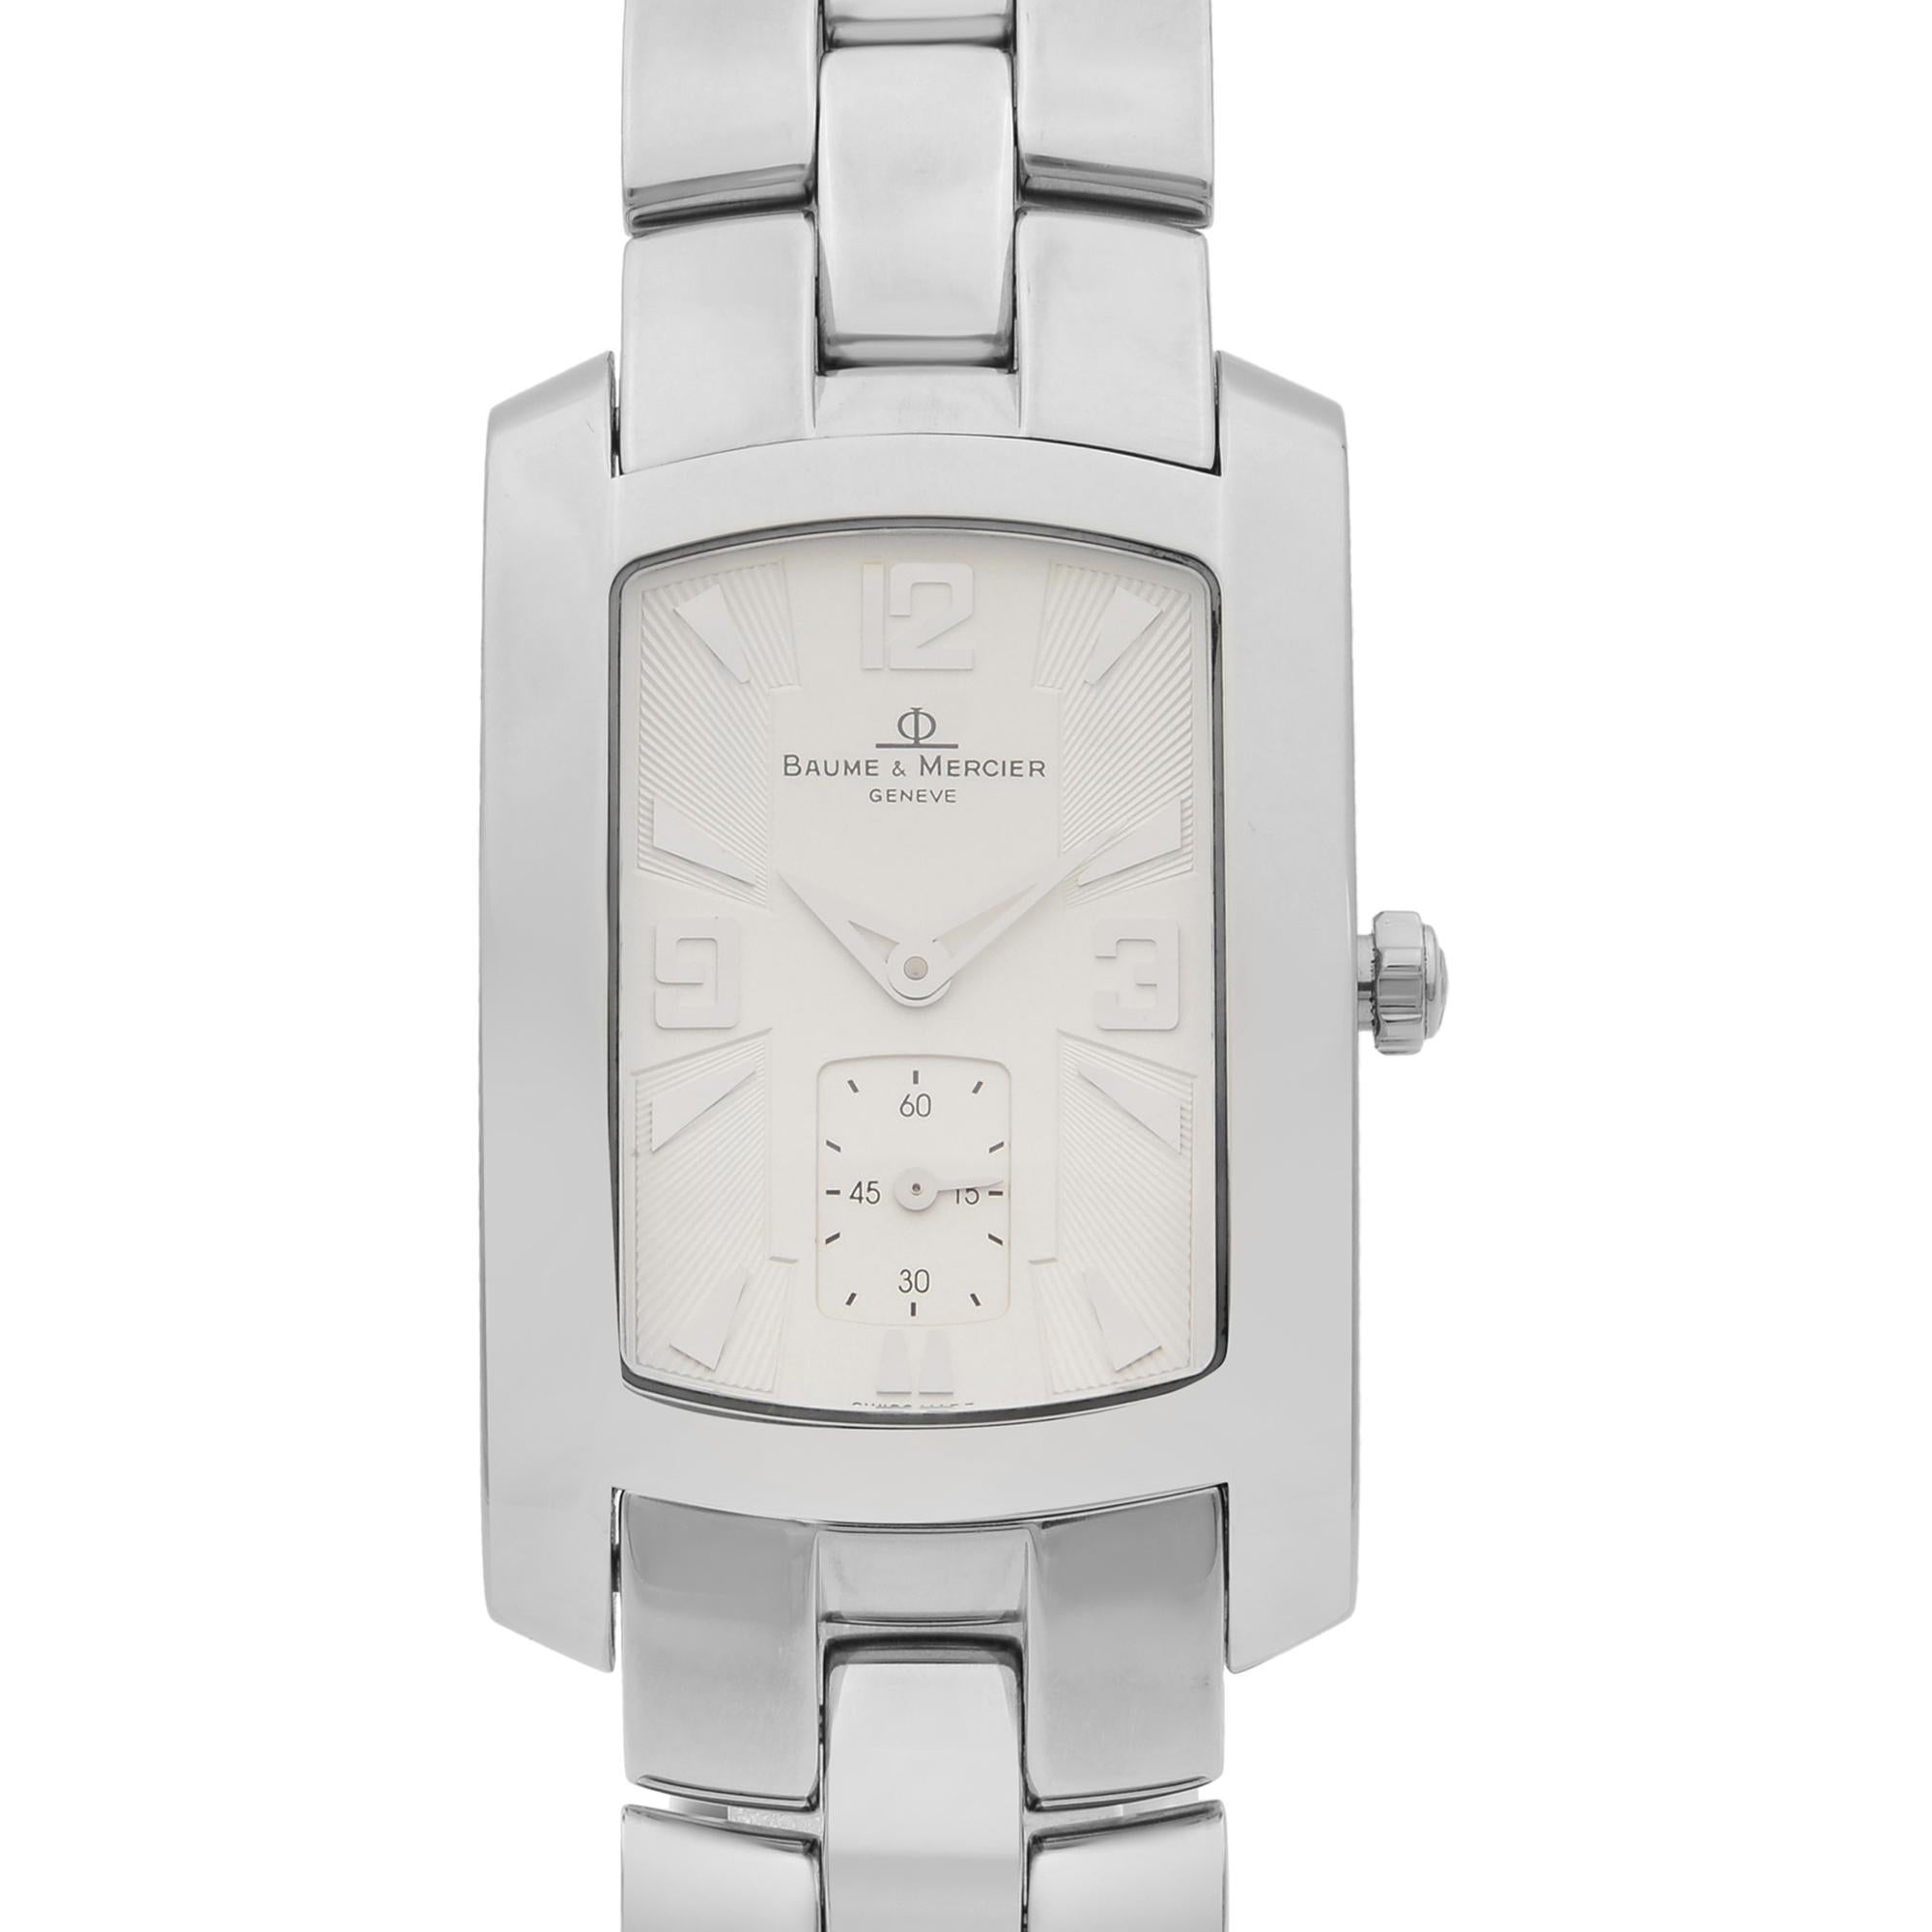 This pre-owned Baume et Mercier Hampton  M0A08014 is a beautiful men's timepiece that is powered by quartz (battery) movement which is cased in a stainless steel case. It has a  rectangle shape face, small seconds subdial dial and has hand arabic